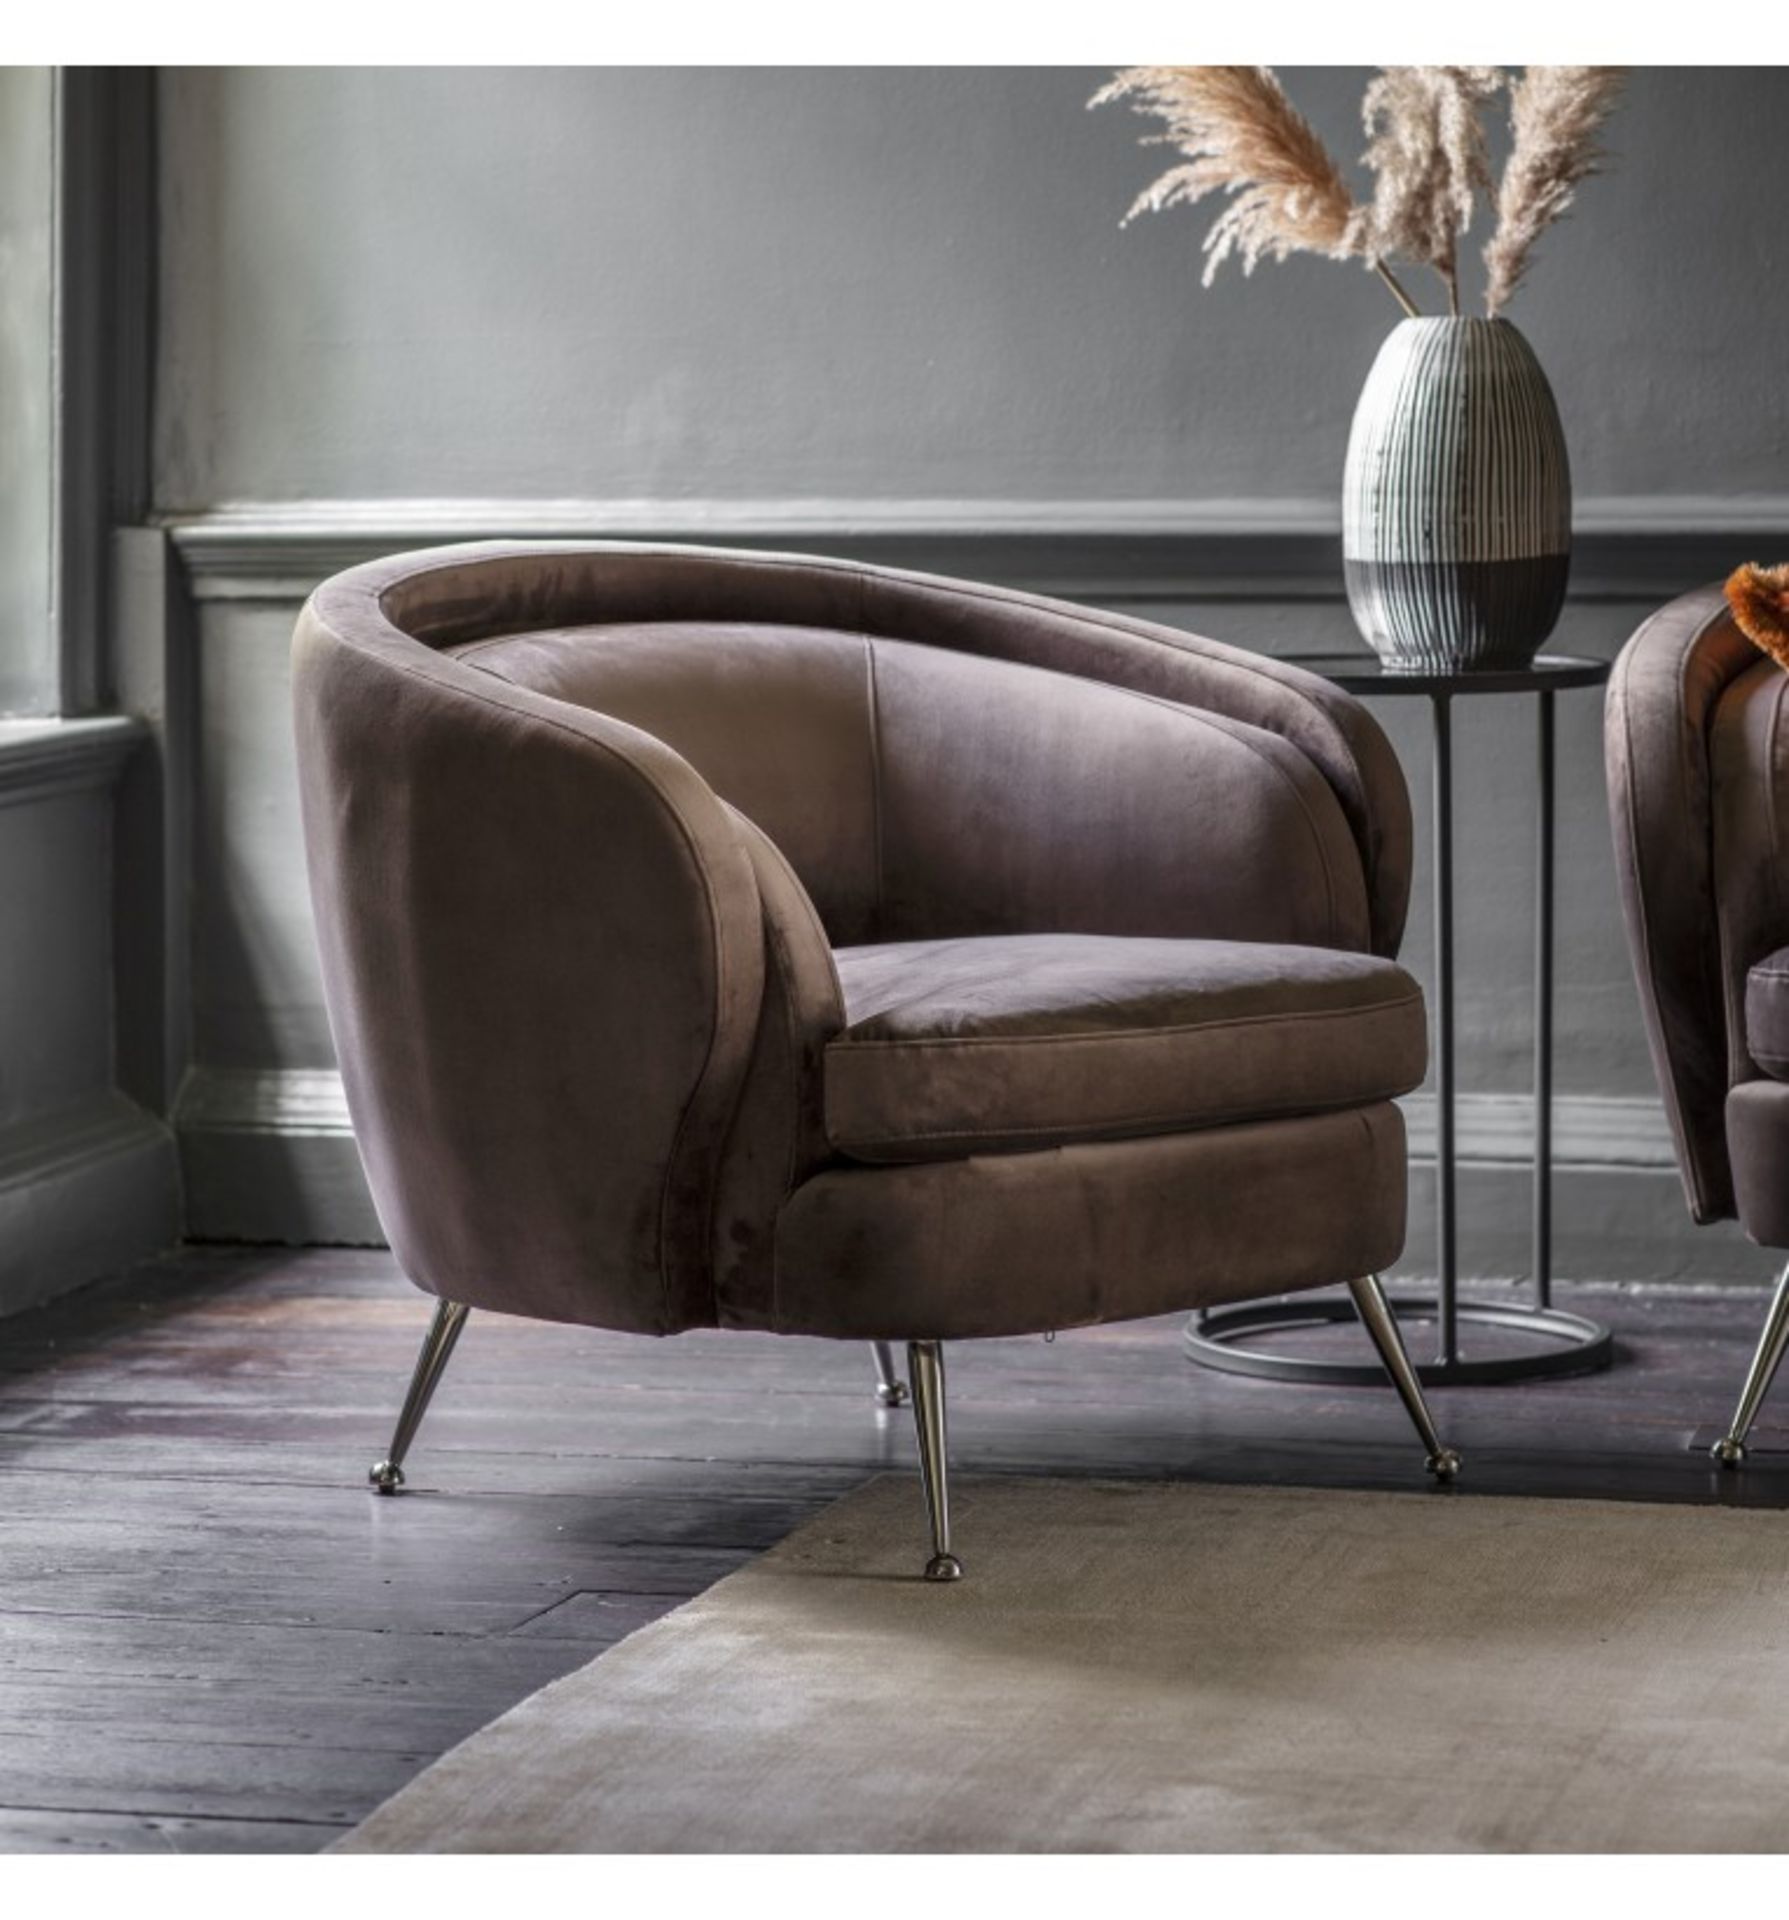 Tesoro Tub Chair Dark Taupe Velvet The Tesoro Tub Chair is the latest addition to our range of